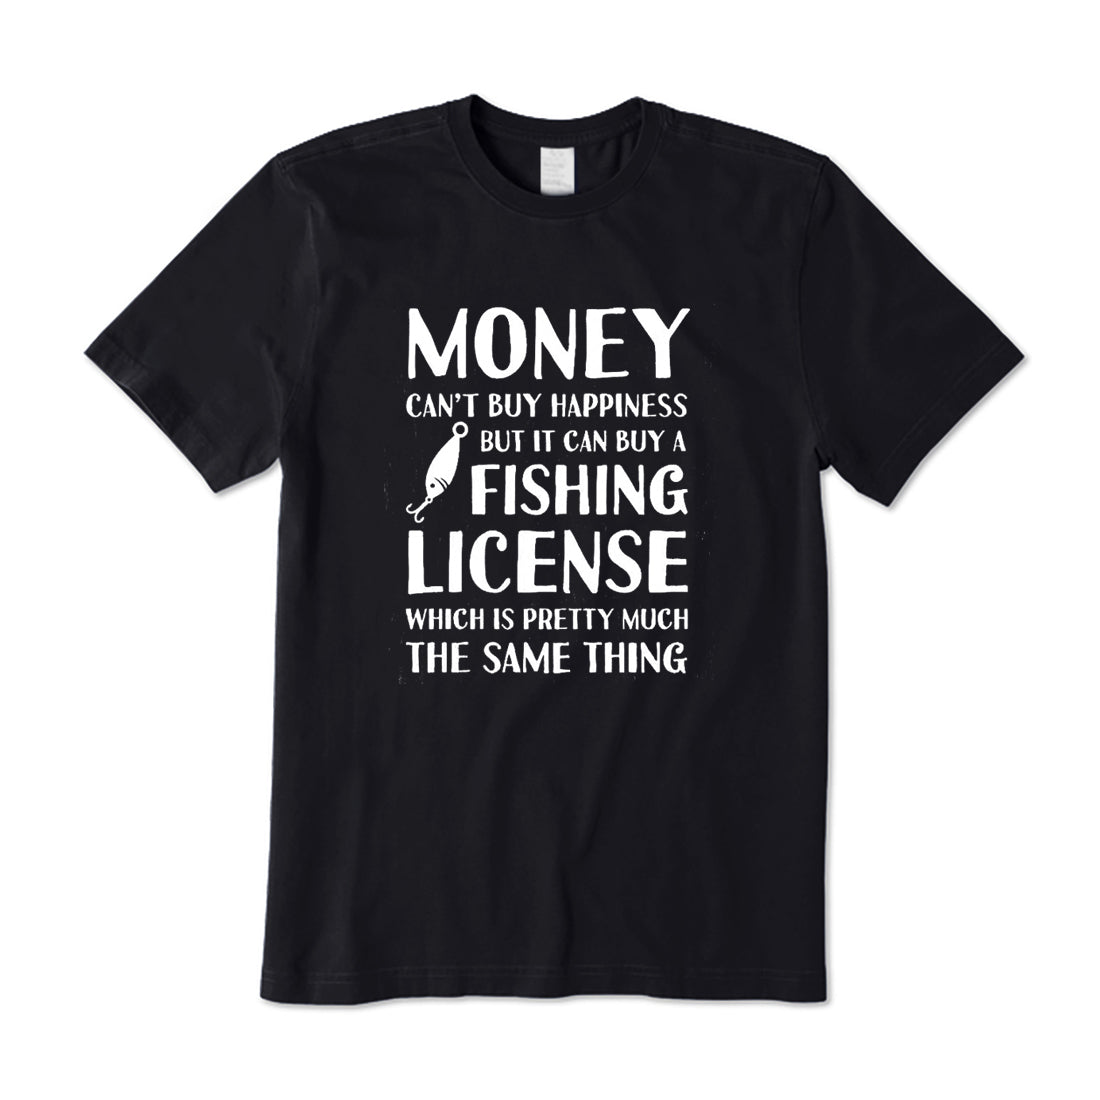 Money Can't Buy Happiness But It Can Buy a Fishing License T-Shirt